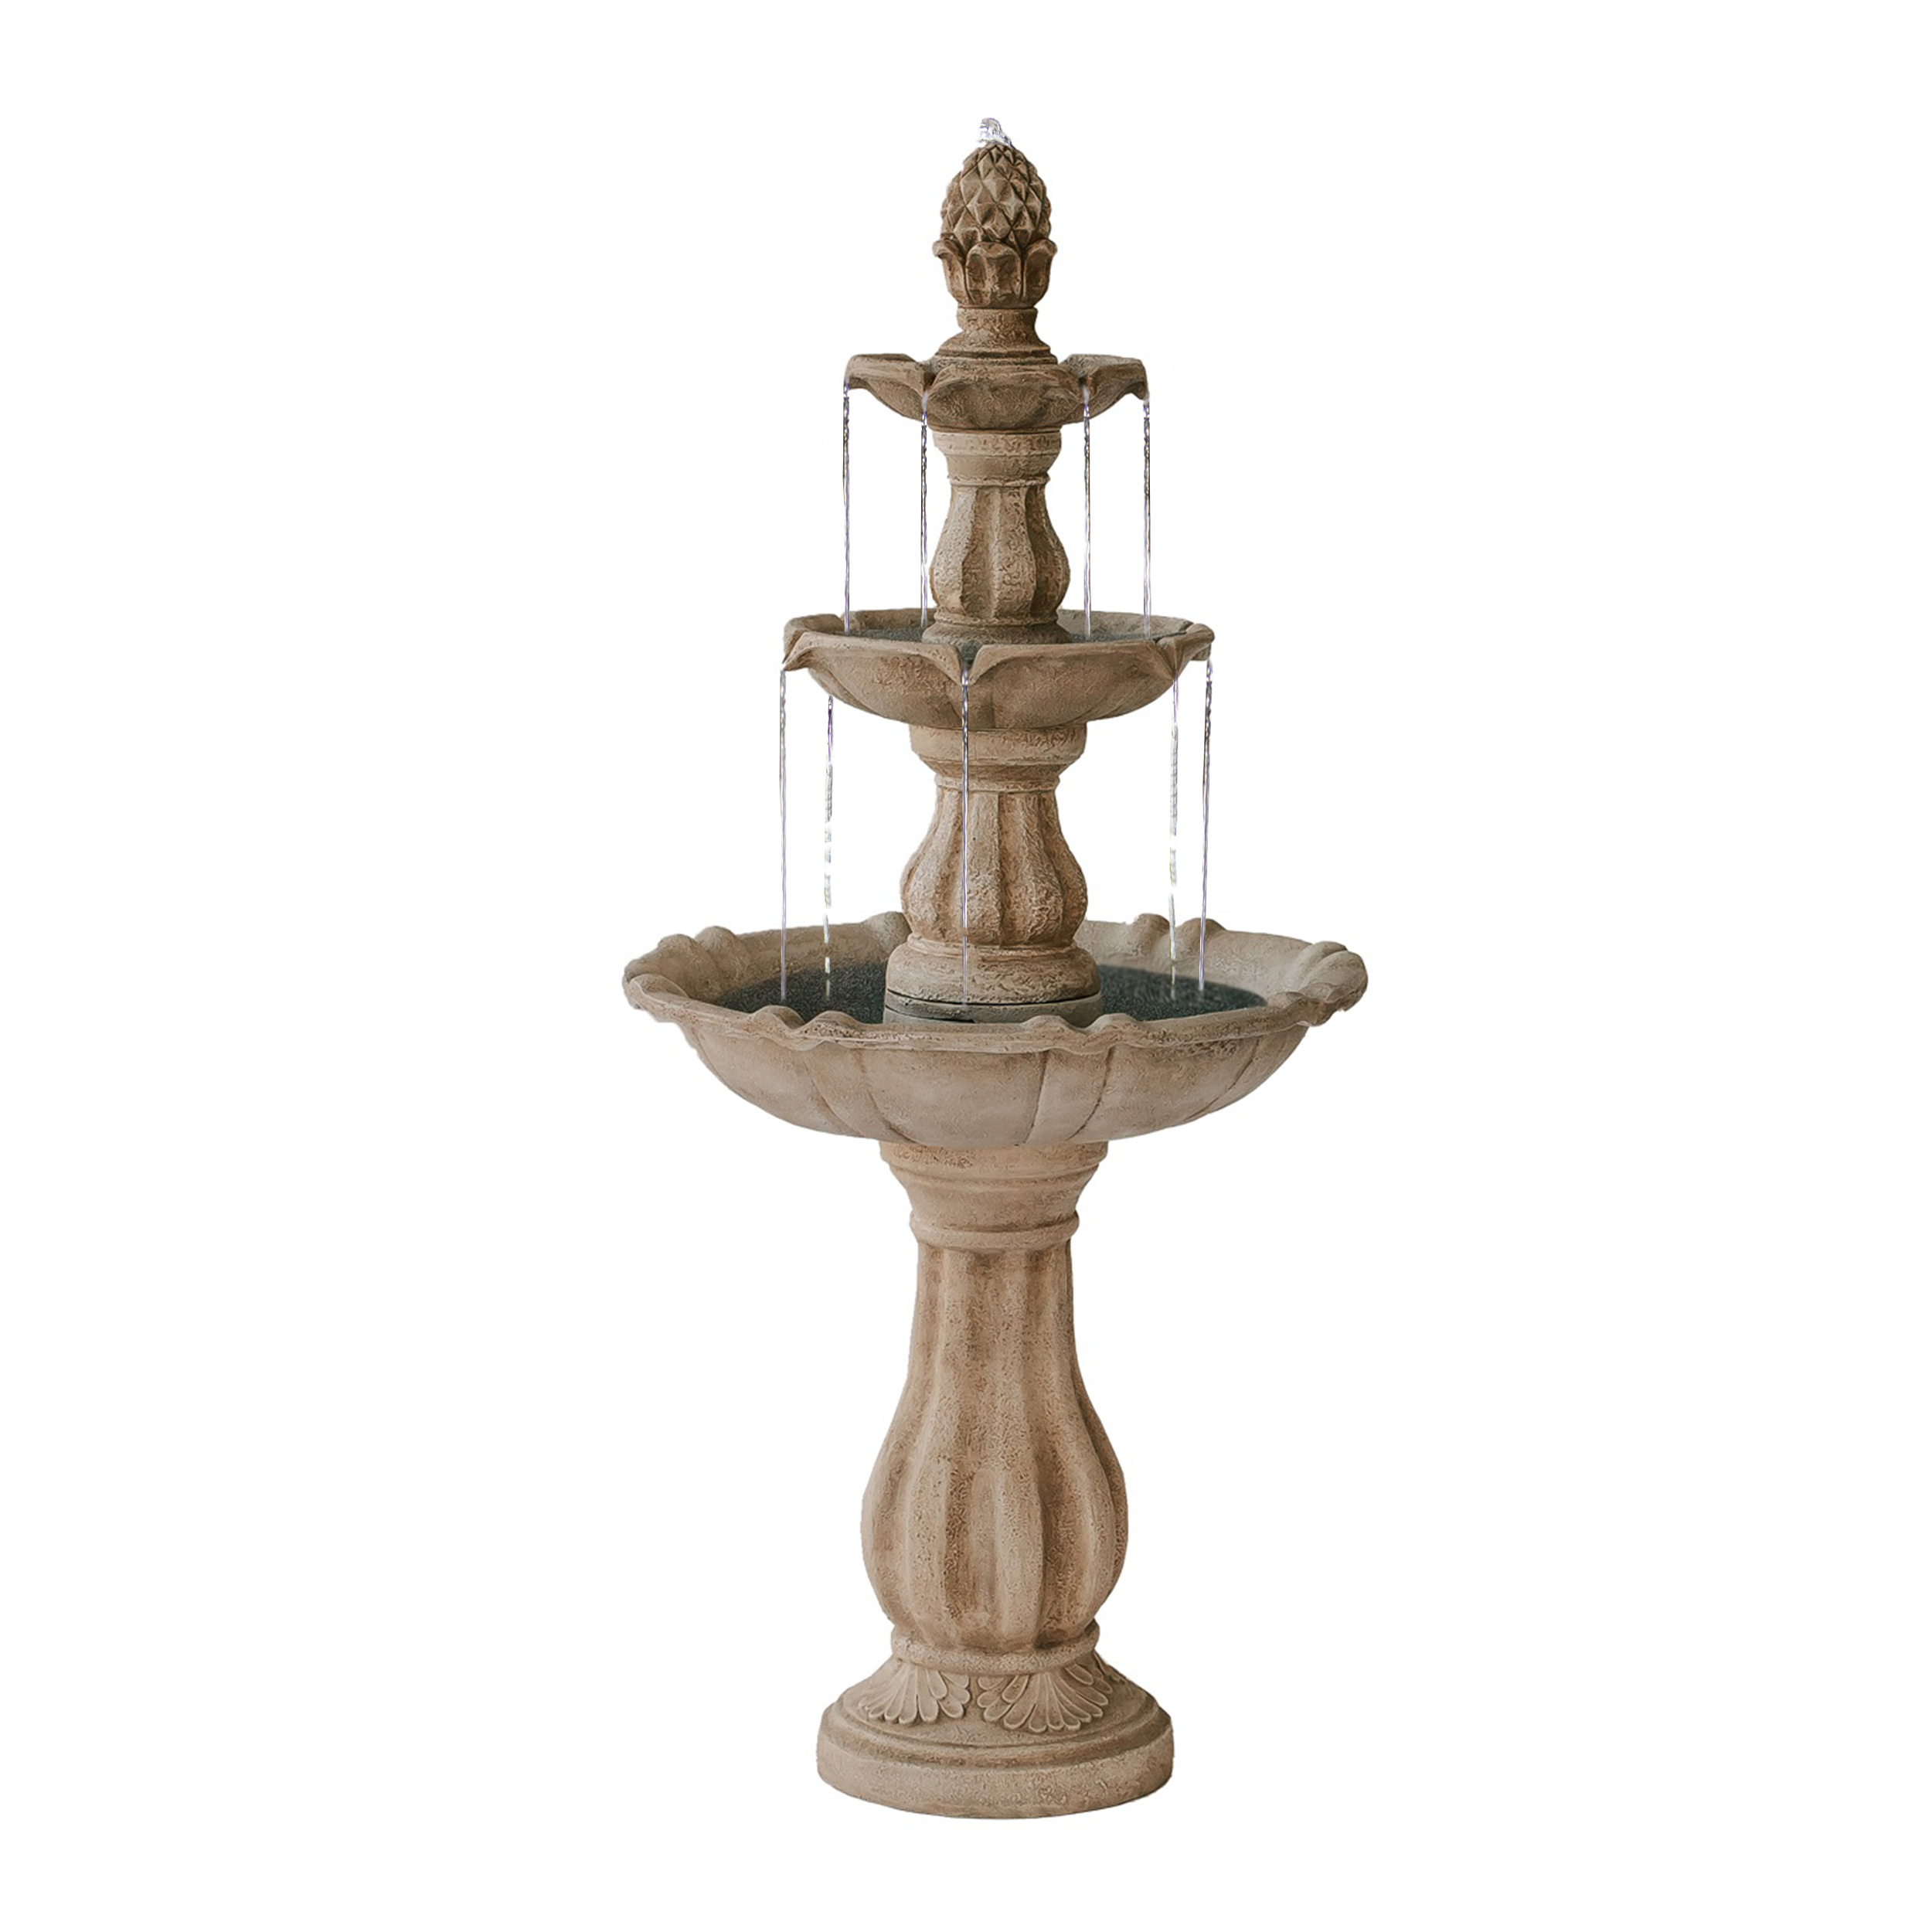 Elevate your garden with a stunning 3-tier classic fountain. Perfect for indoor/outdoor décor. Transform your lawn with this elegant cascading waterfall fountain.